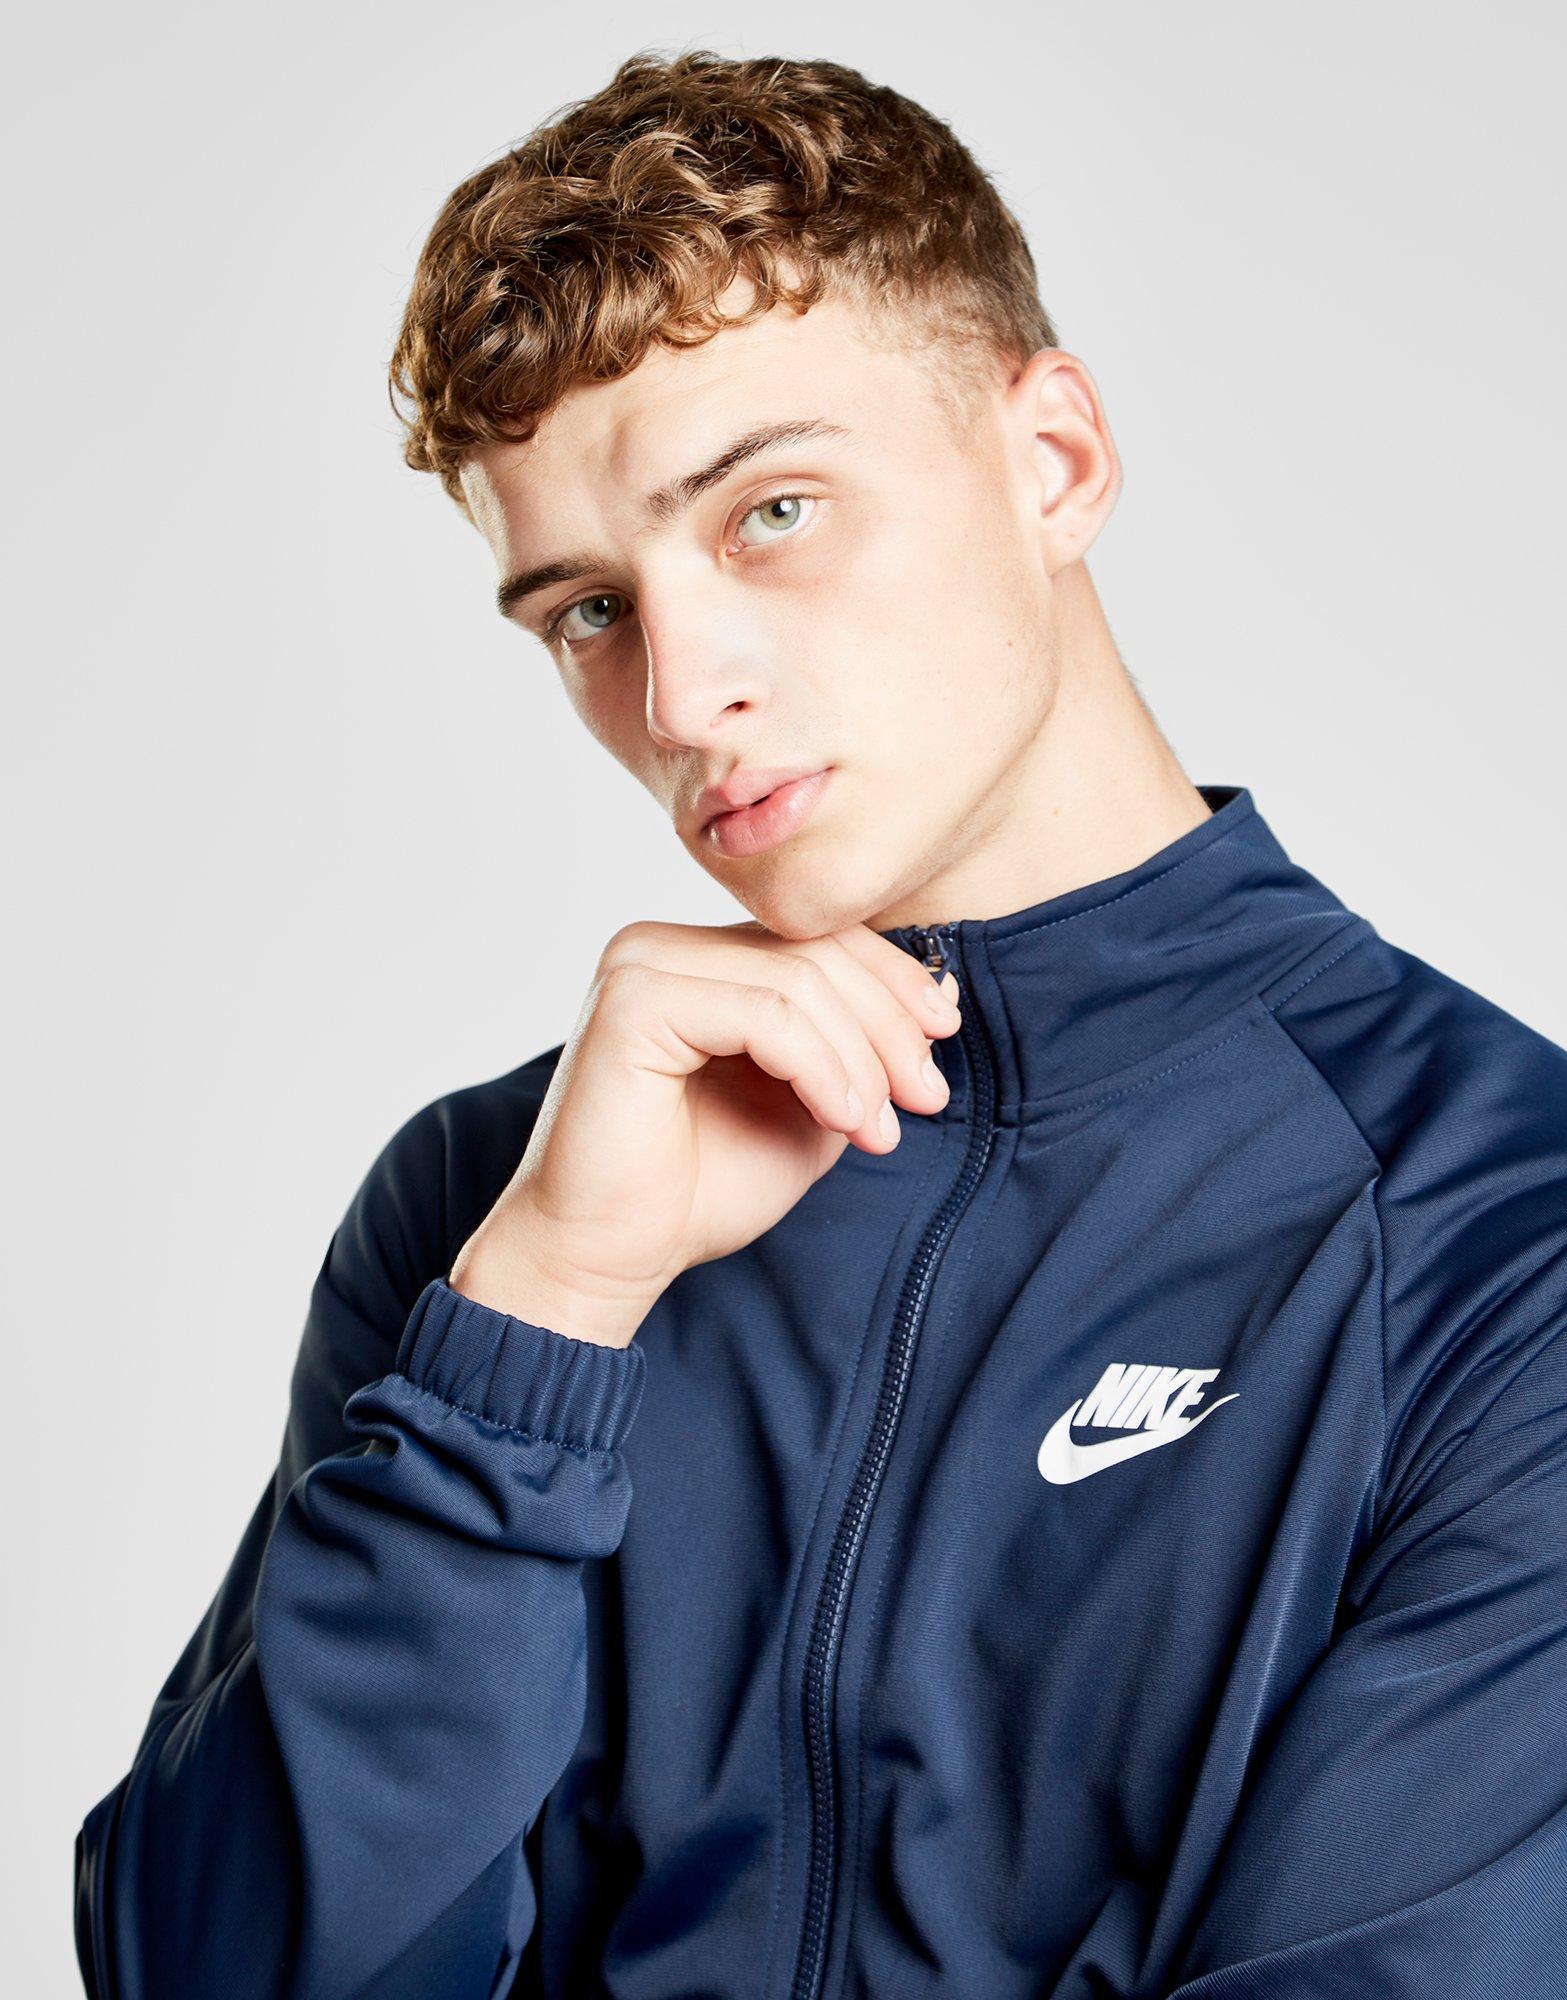 nike blue tracksuit top